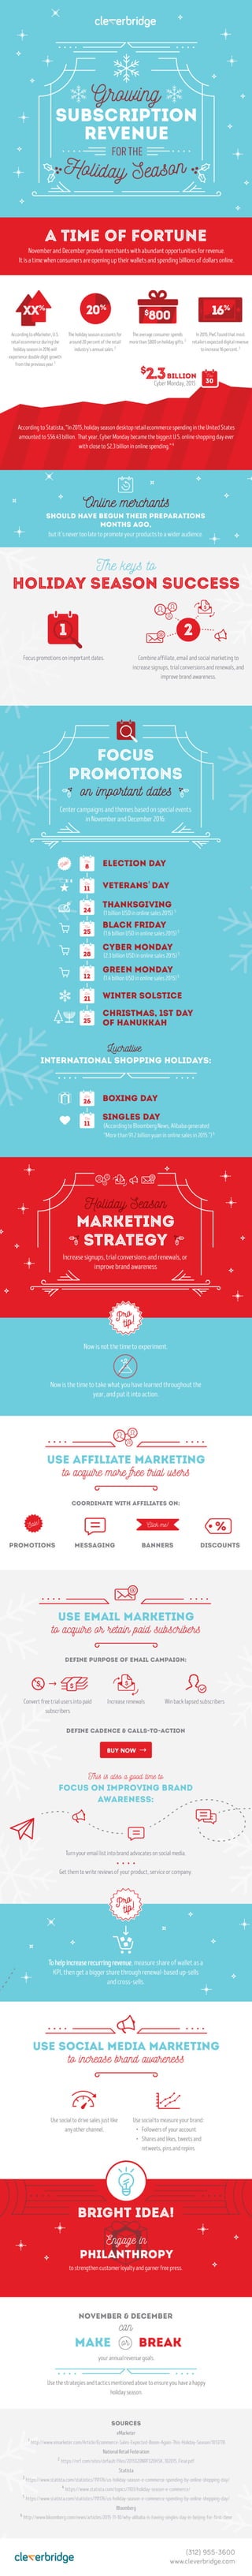 Growing Subscription Revenue for the Holiday Season [Infographic]